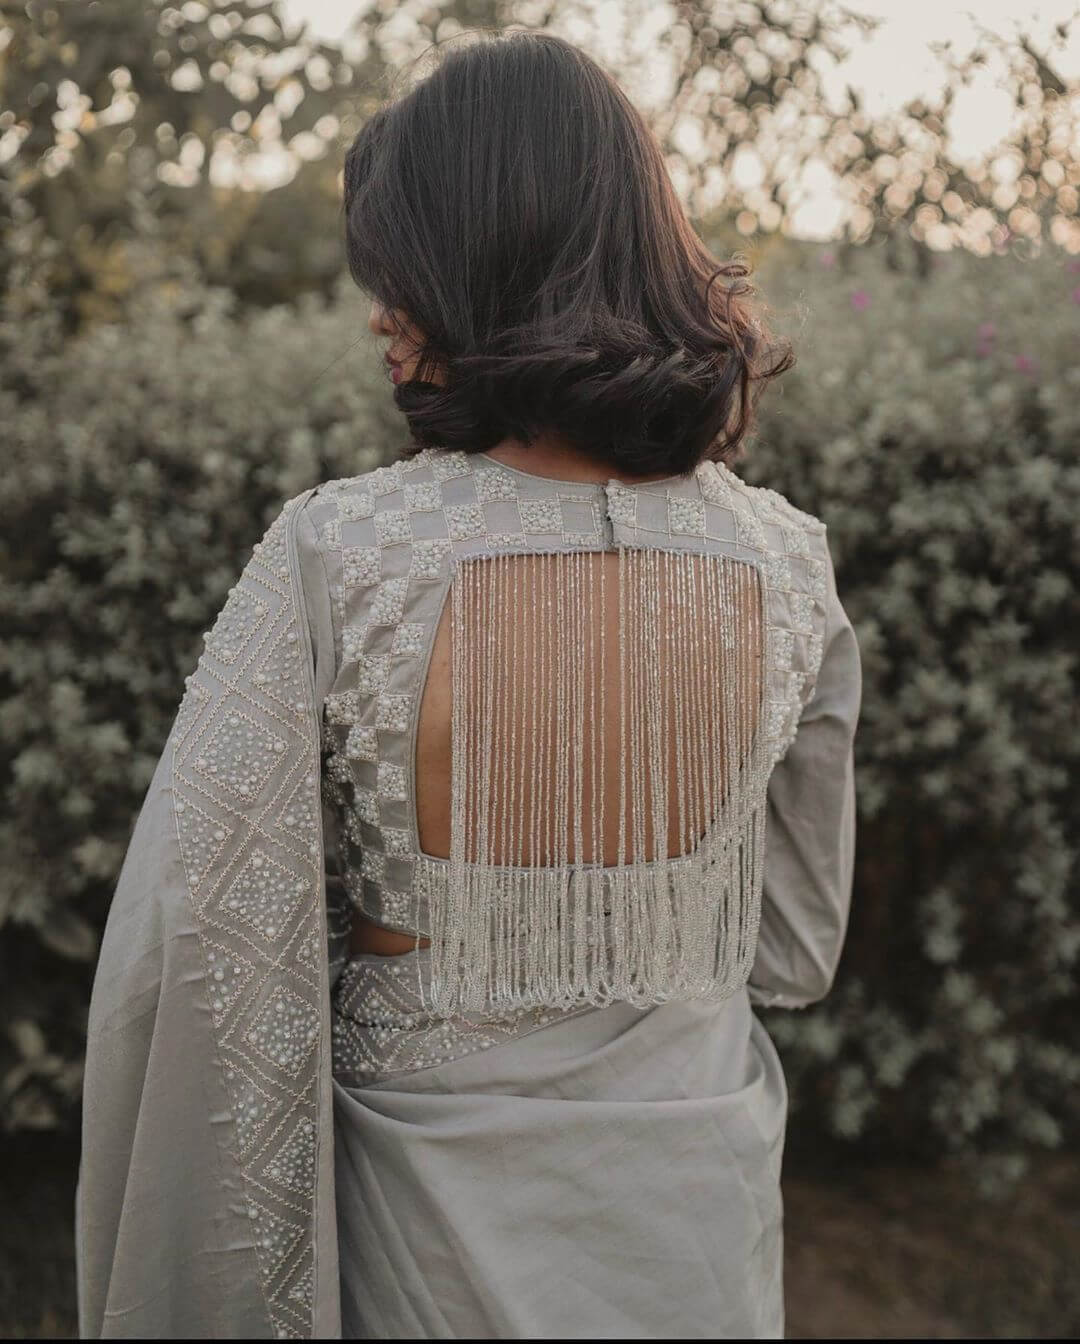 Latest Blouse Back Design Ideas For 2020 Brides-To-Be!